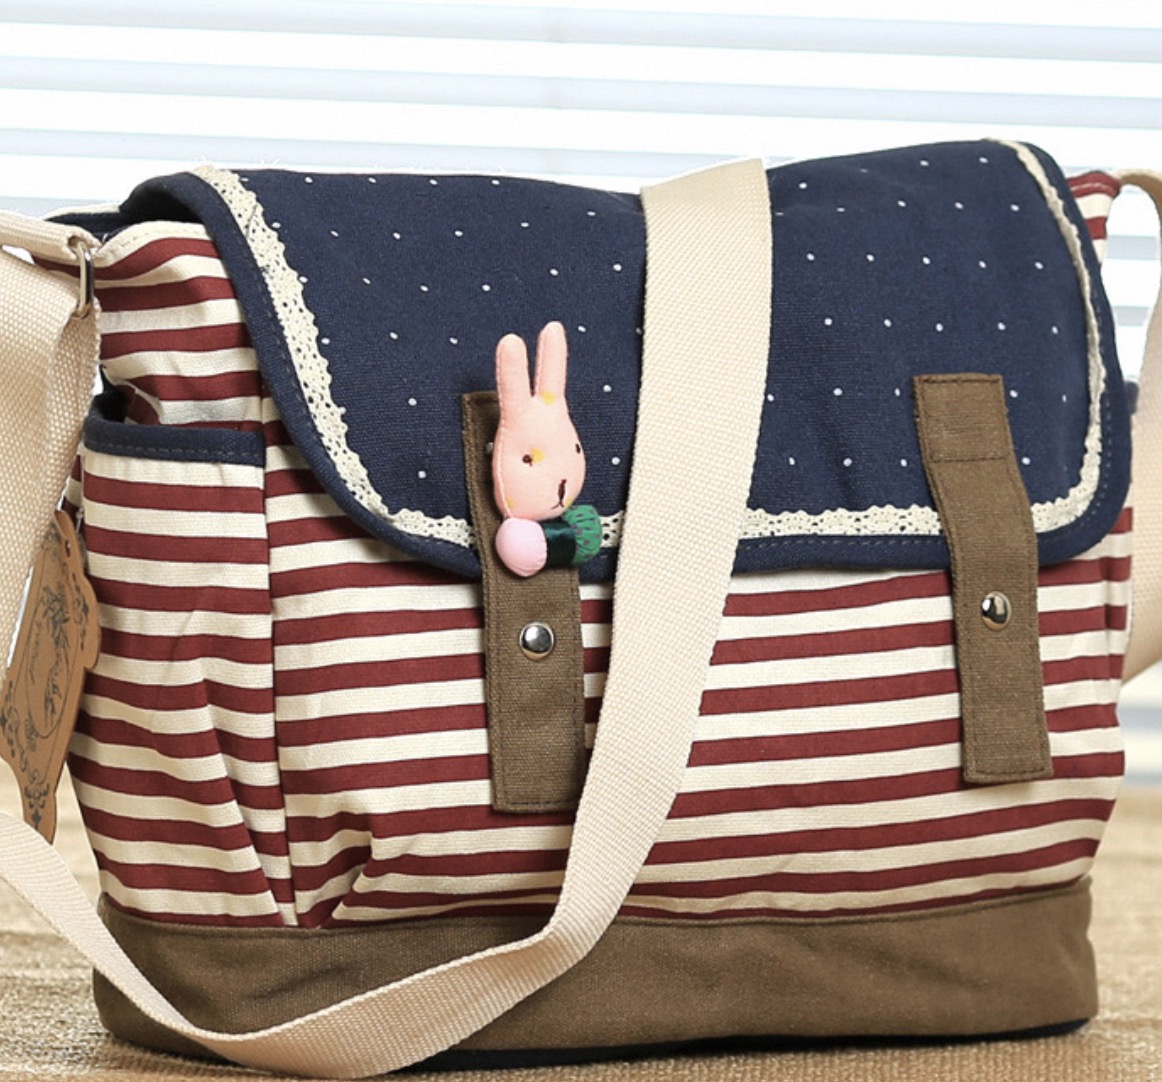 Messenger Bags for School Women: Chic and Functional Picks插图4